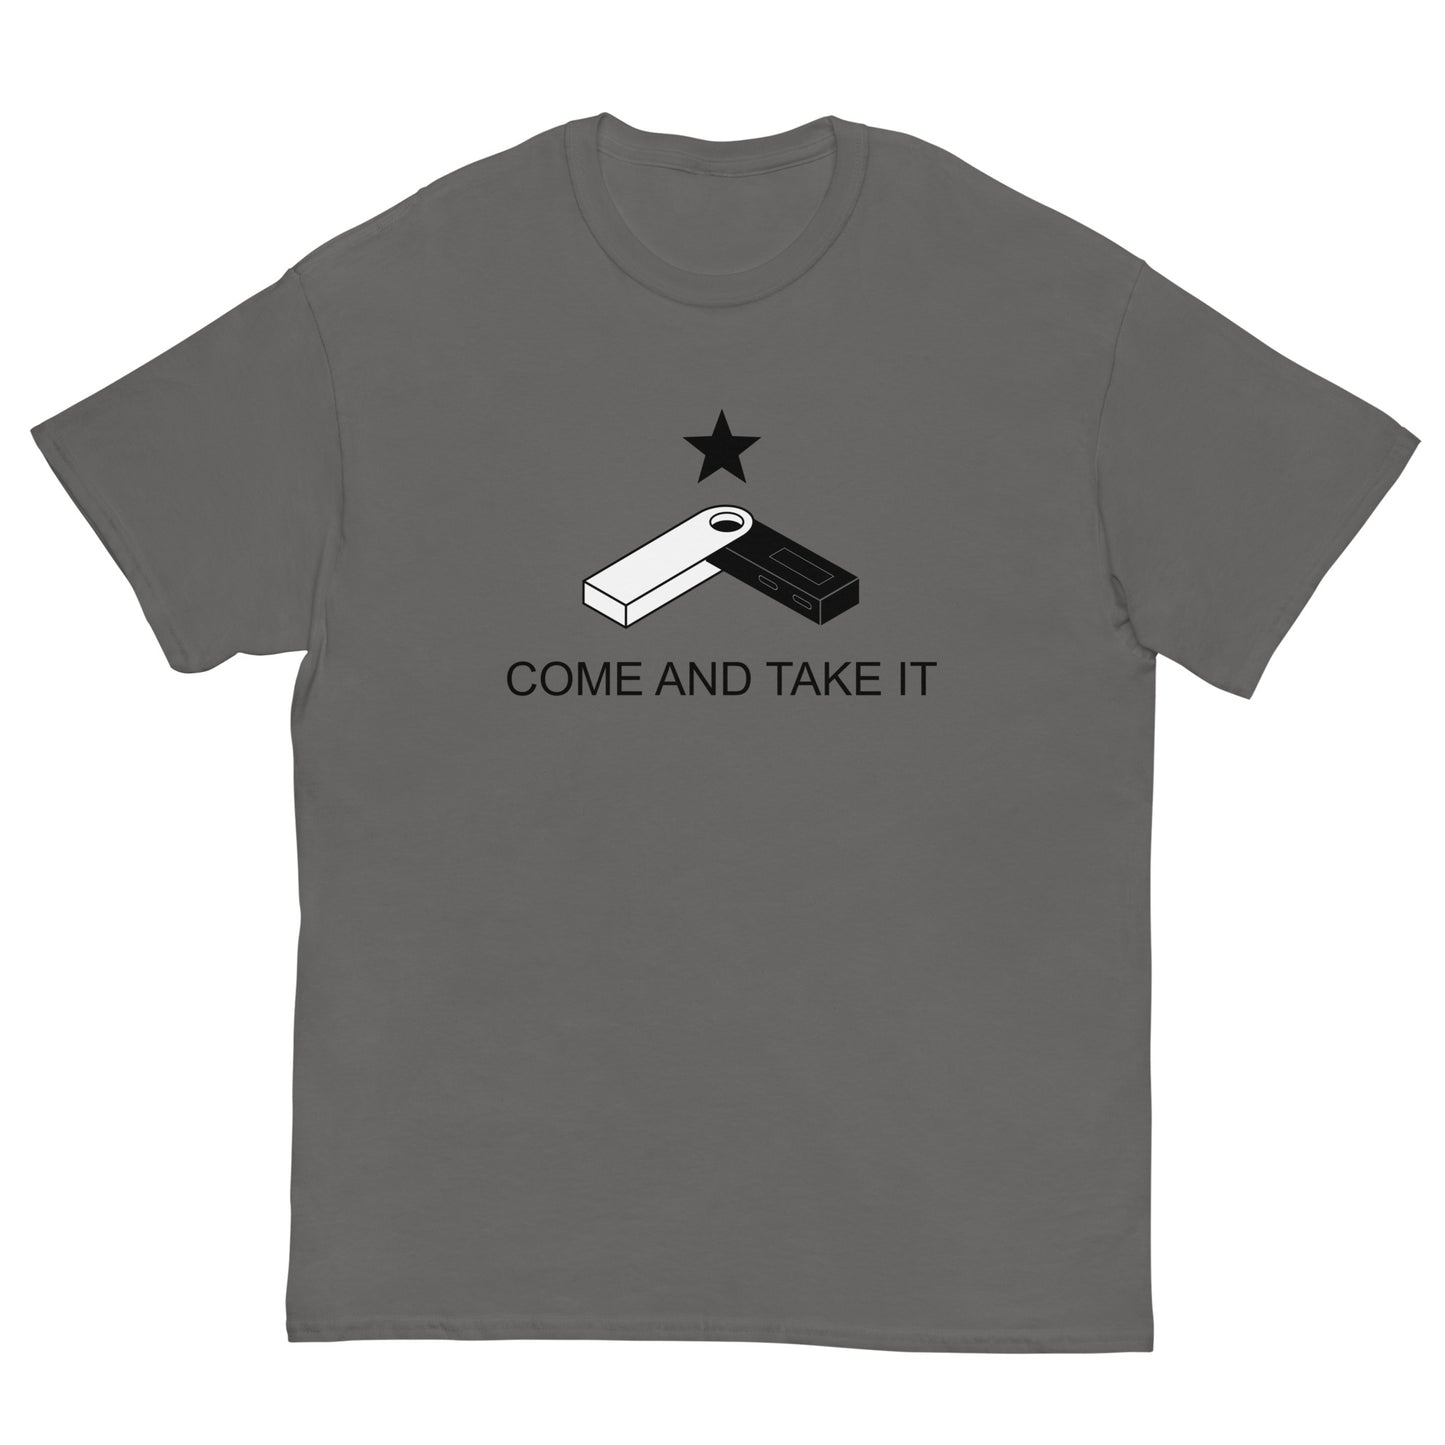 Come and take it! / T-Shirt